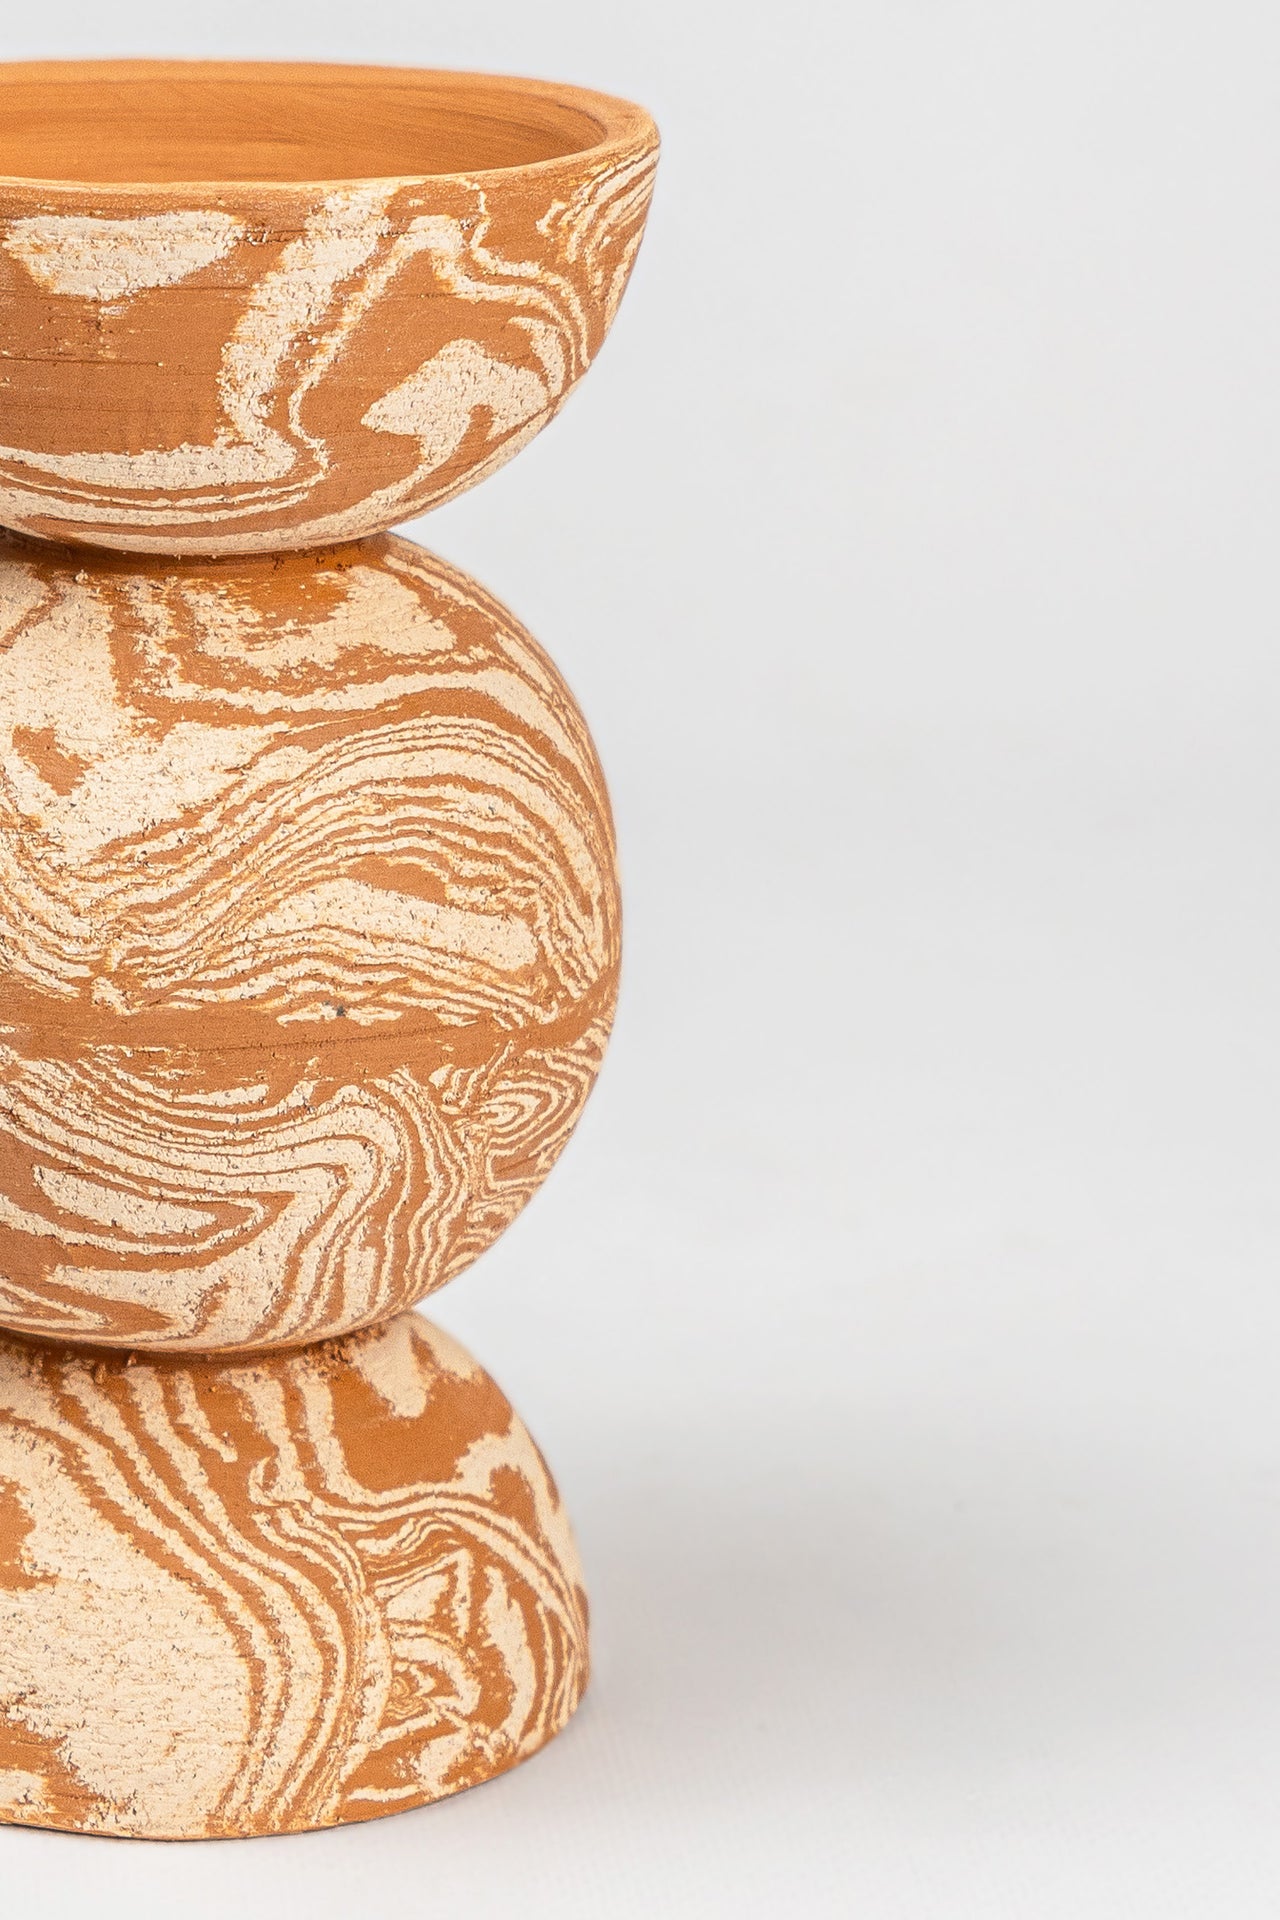 Chubby Totem Marmol Terracotta and Leche